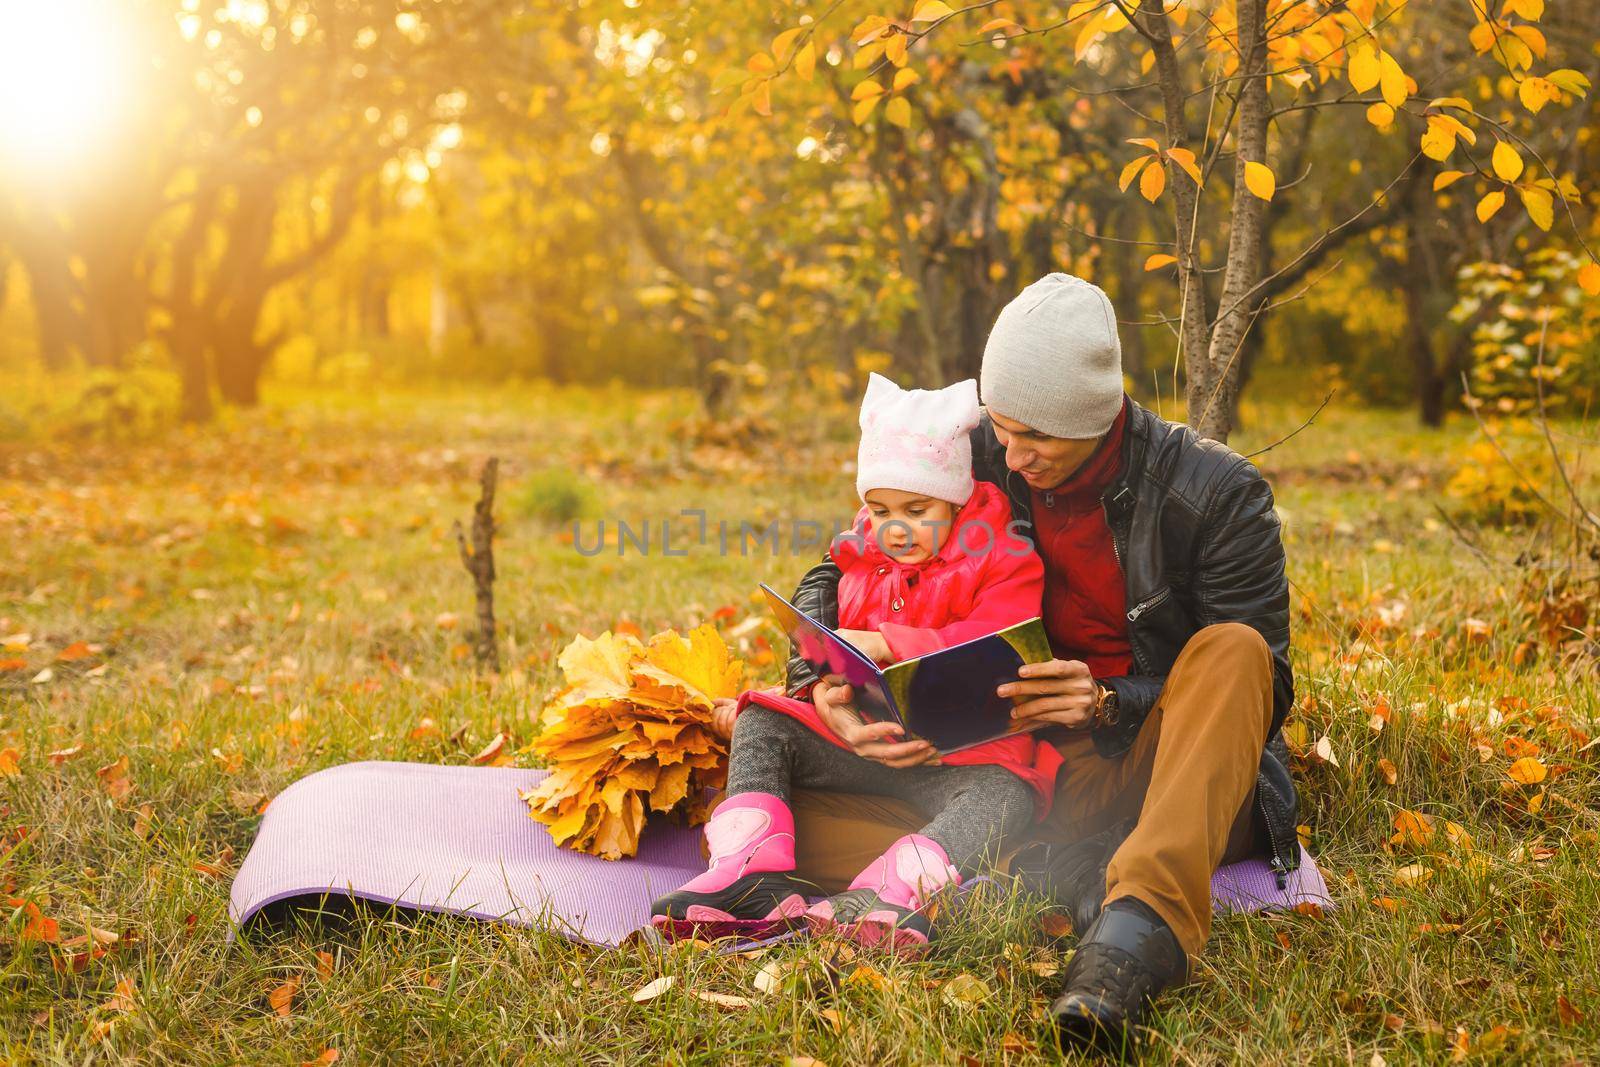 Happy family. daughter kissing and hugging her dad on a walk in the autumn leaf fall in park